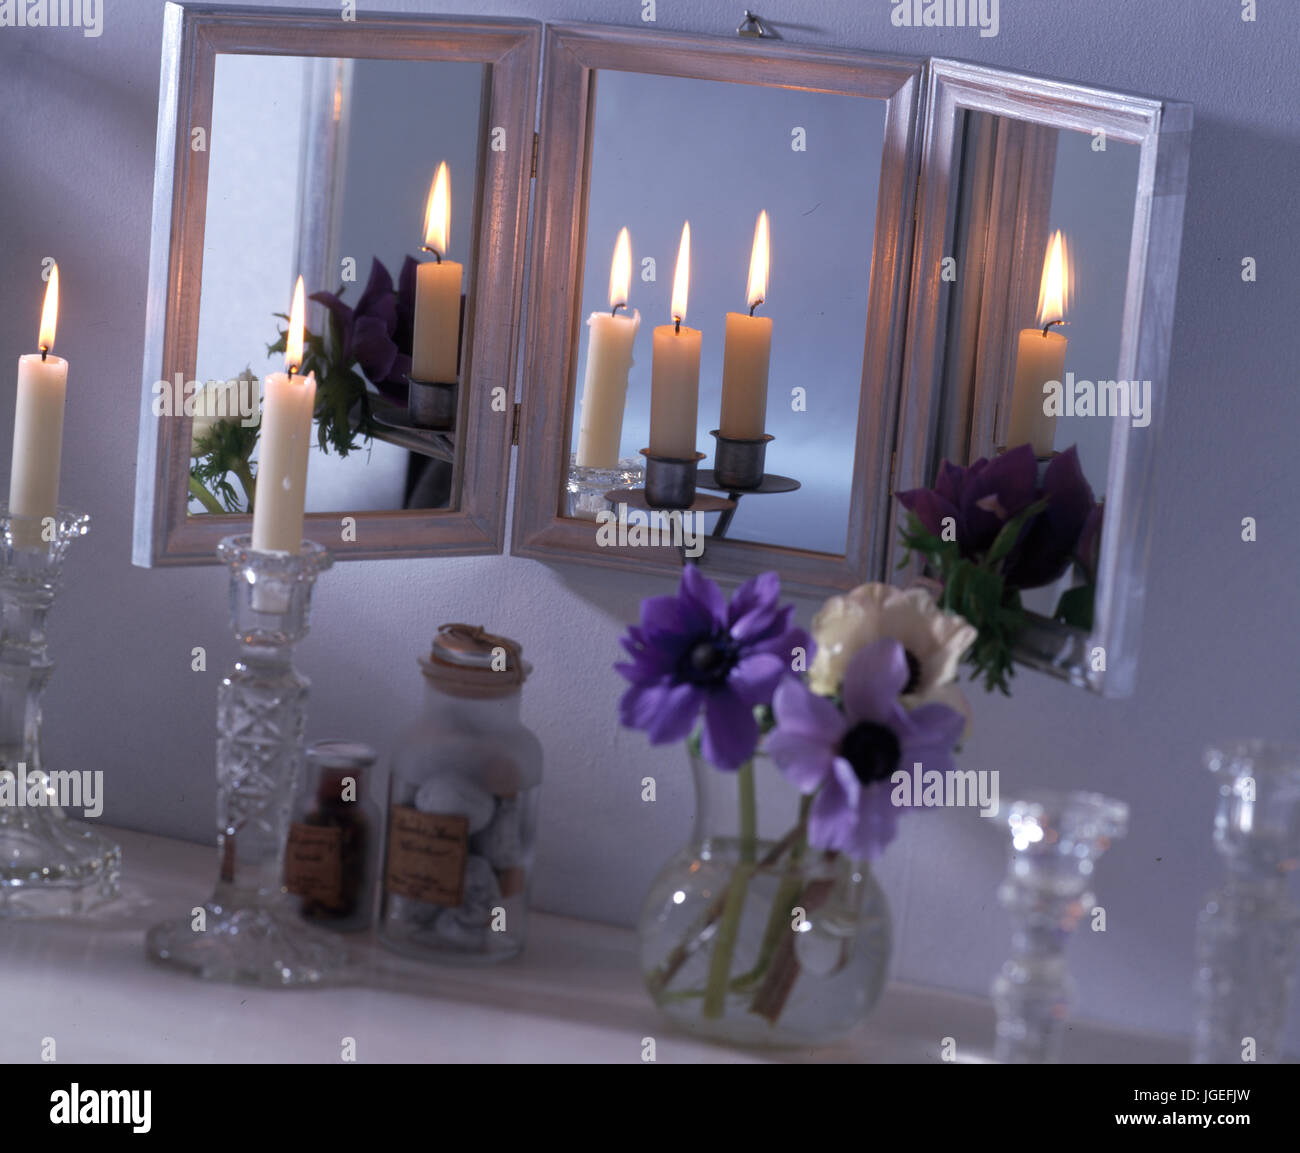 Dressing table with triple mirror, candles & anemones Stock Photo